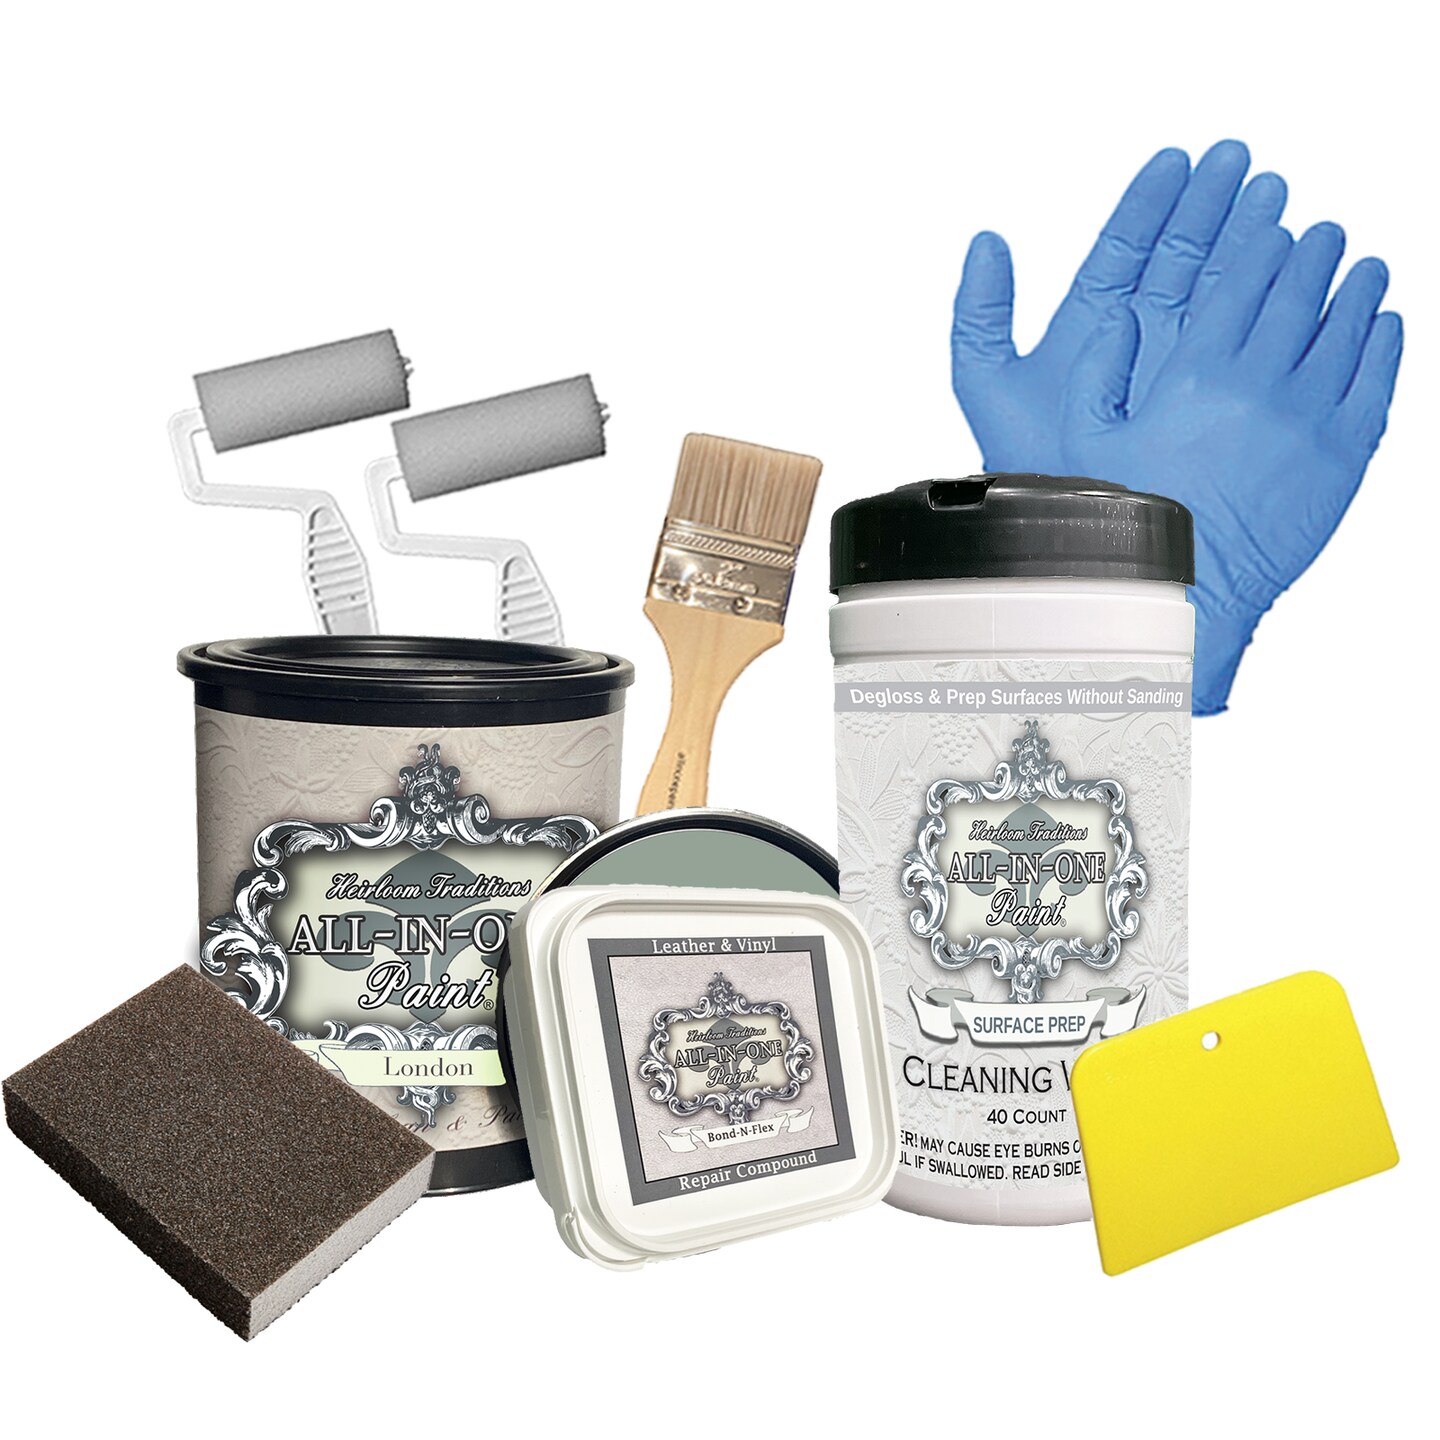 Vinyl & Leather Fix Kit: Filler Repair Putty & Tools for Upholstery